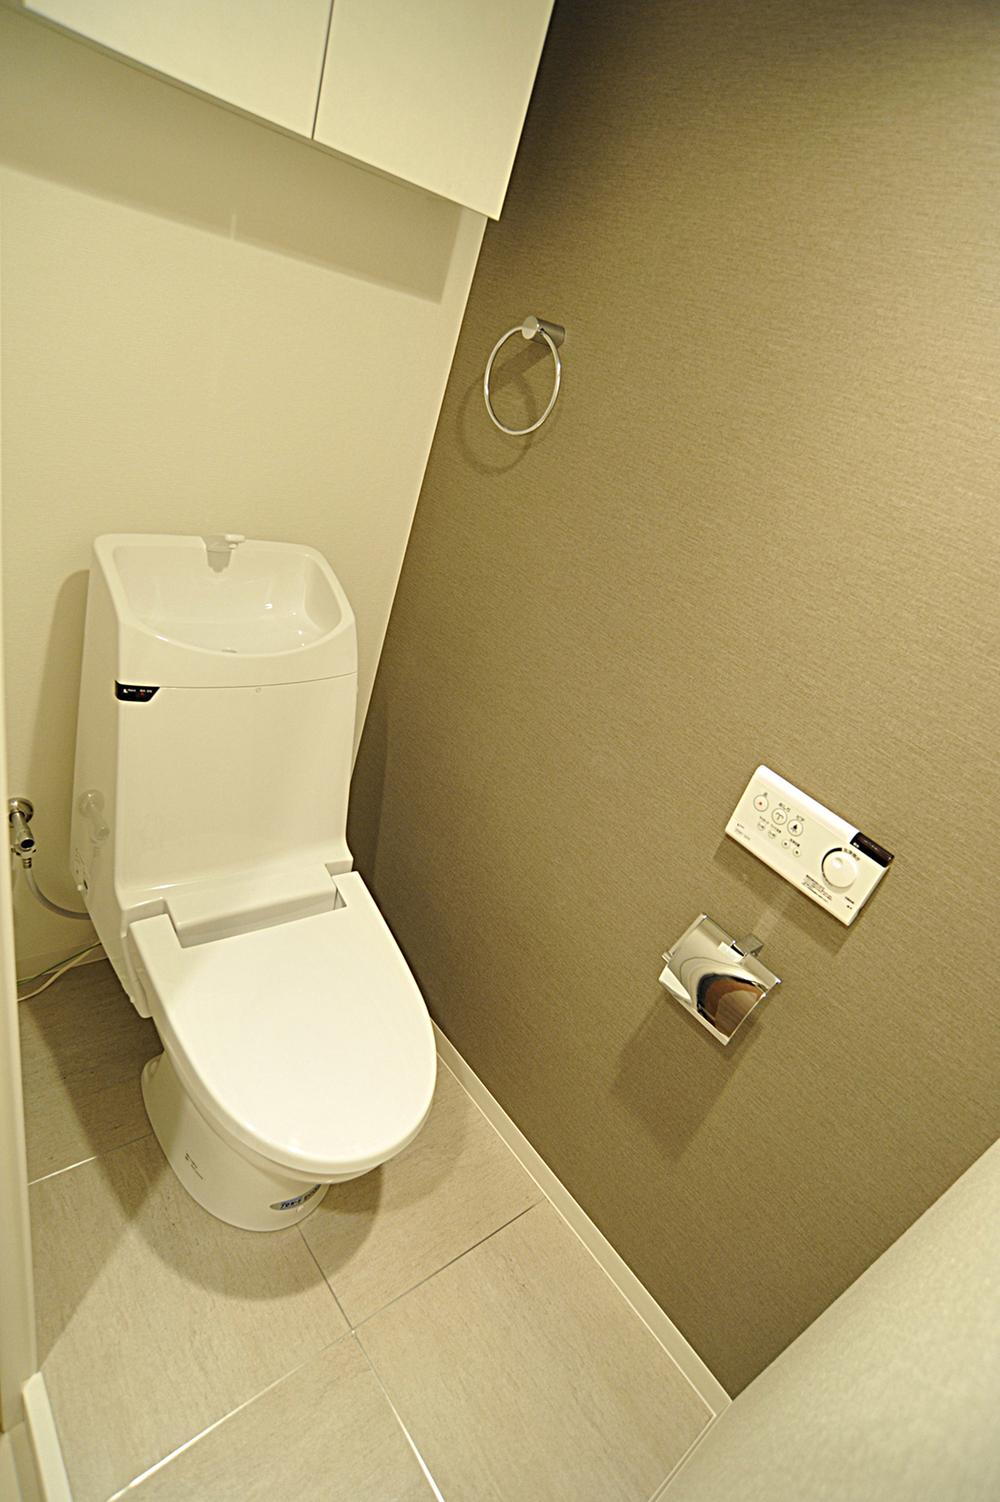 Toilet. Construction example photo / A full renovation from the skeleton, Reborn in the same way new construction.